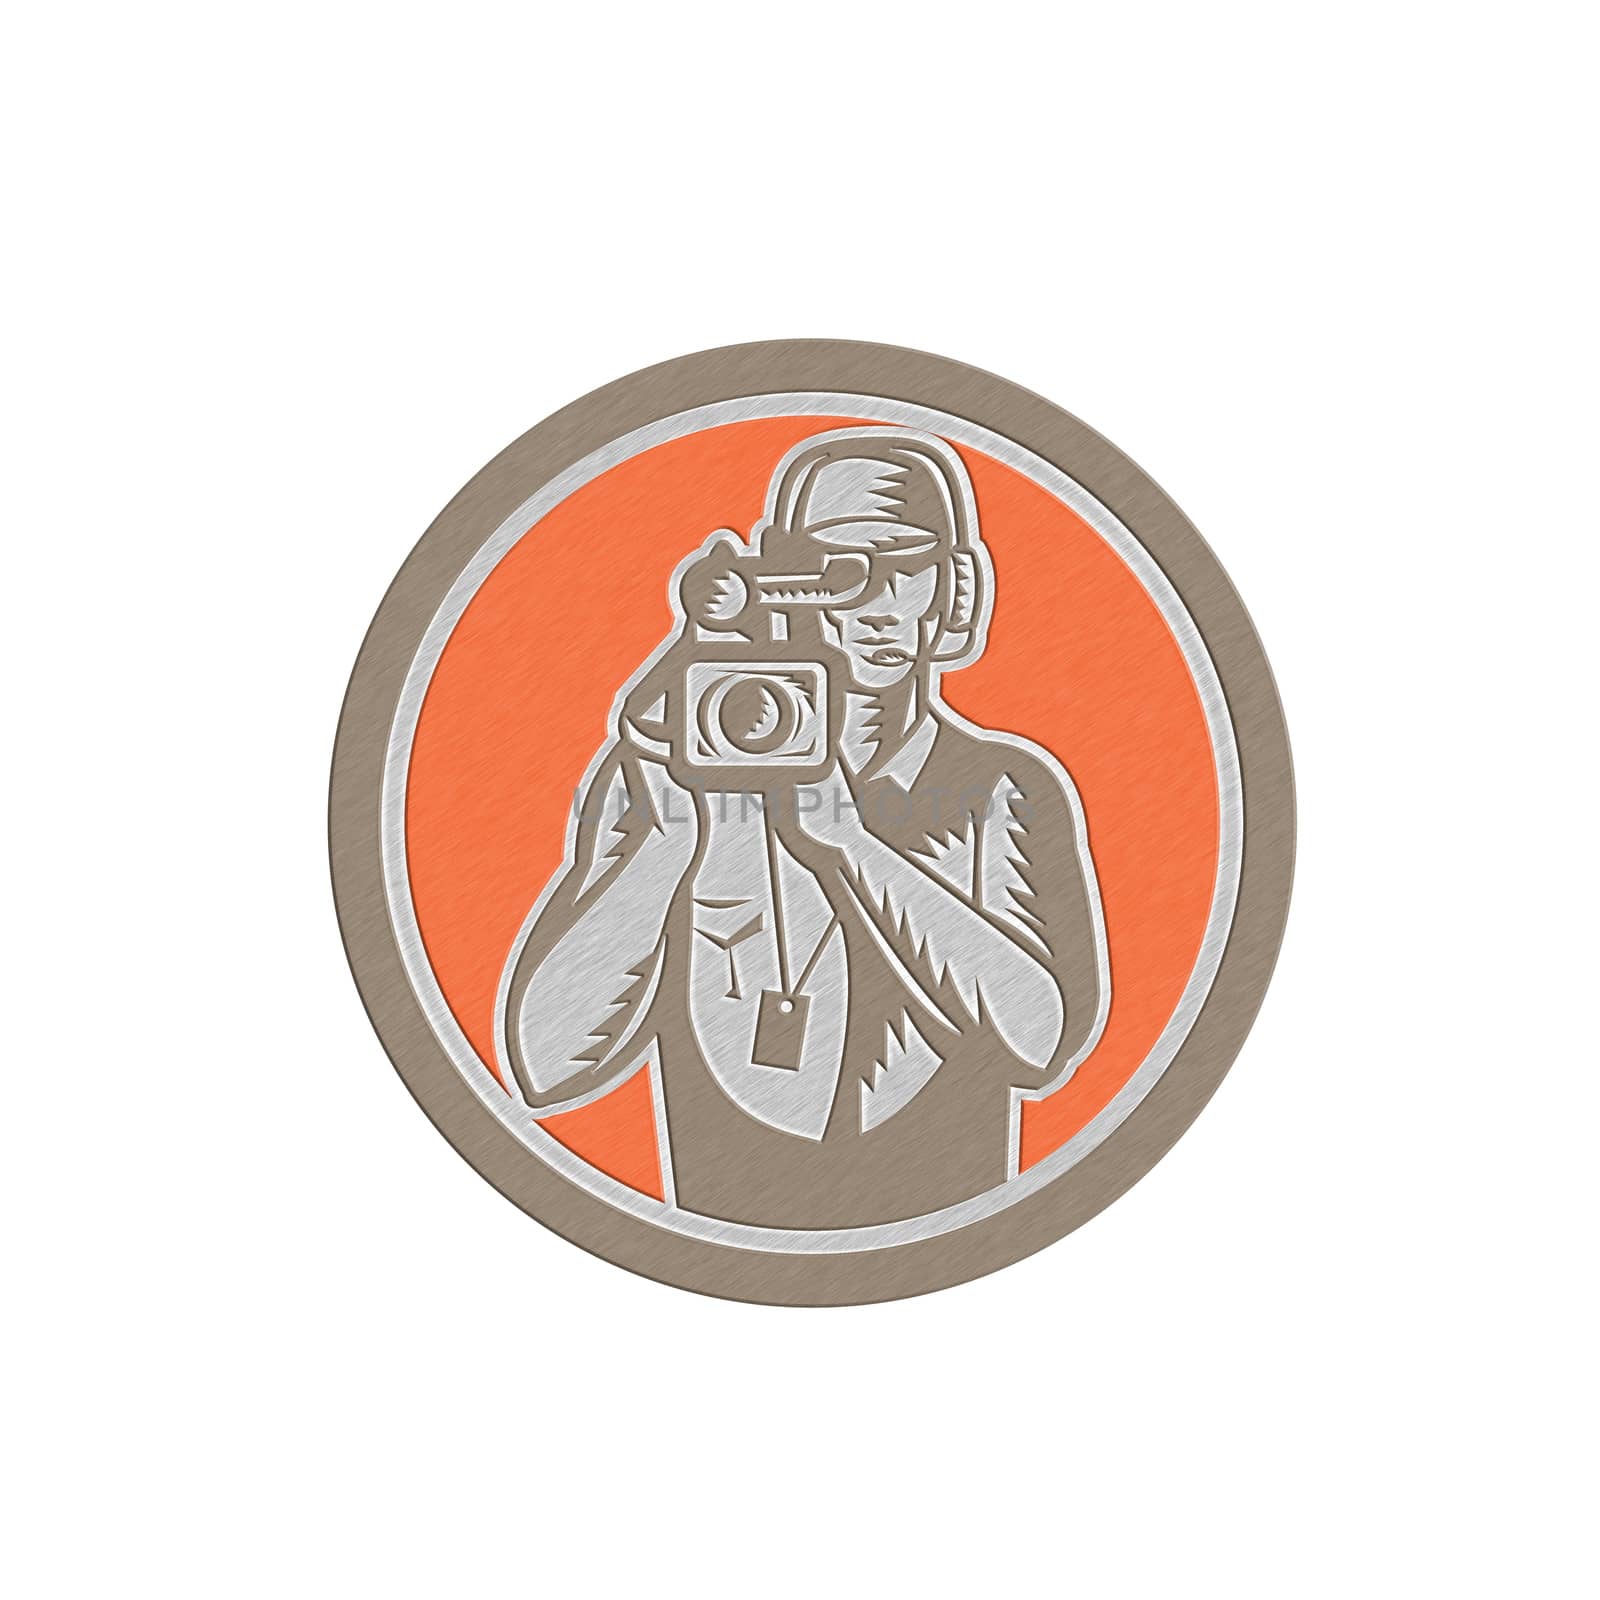 Metallic styled illustration of a cameraman movie director holding filming vintage movie video camera set inside circle done in retro style.